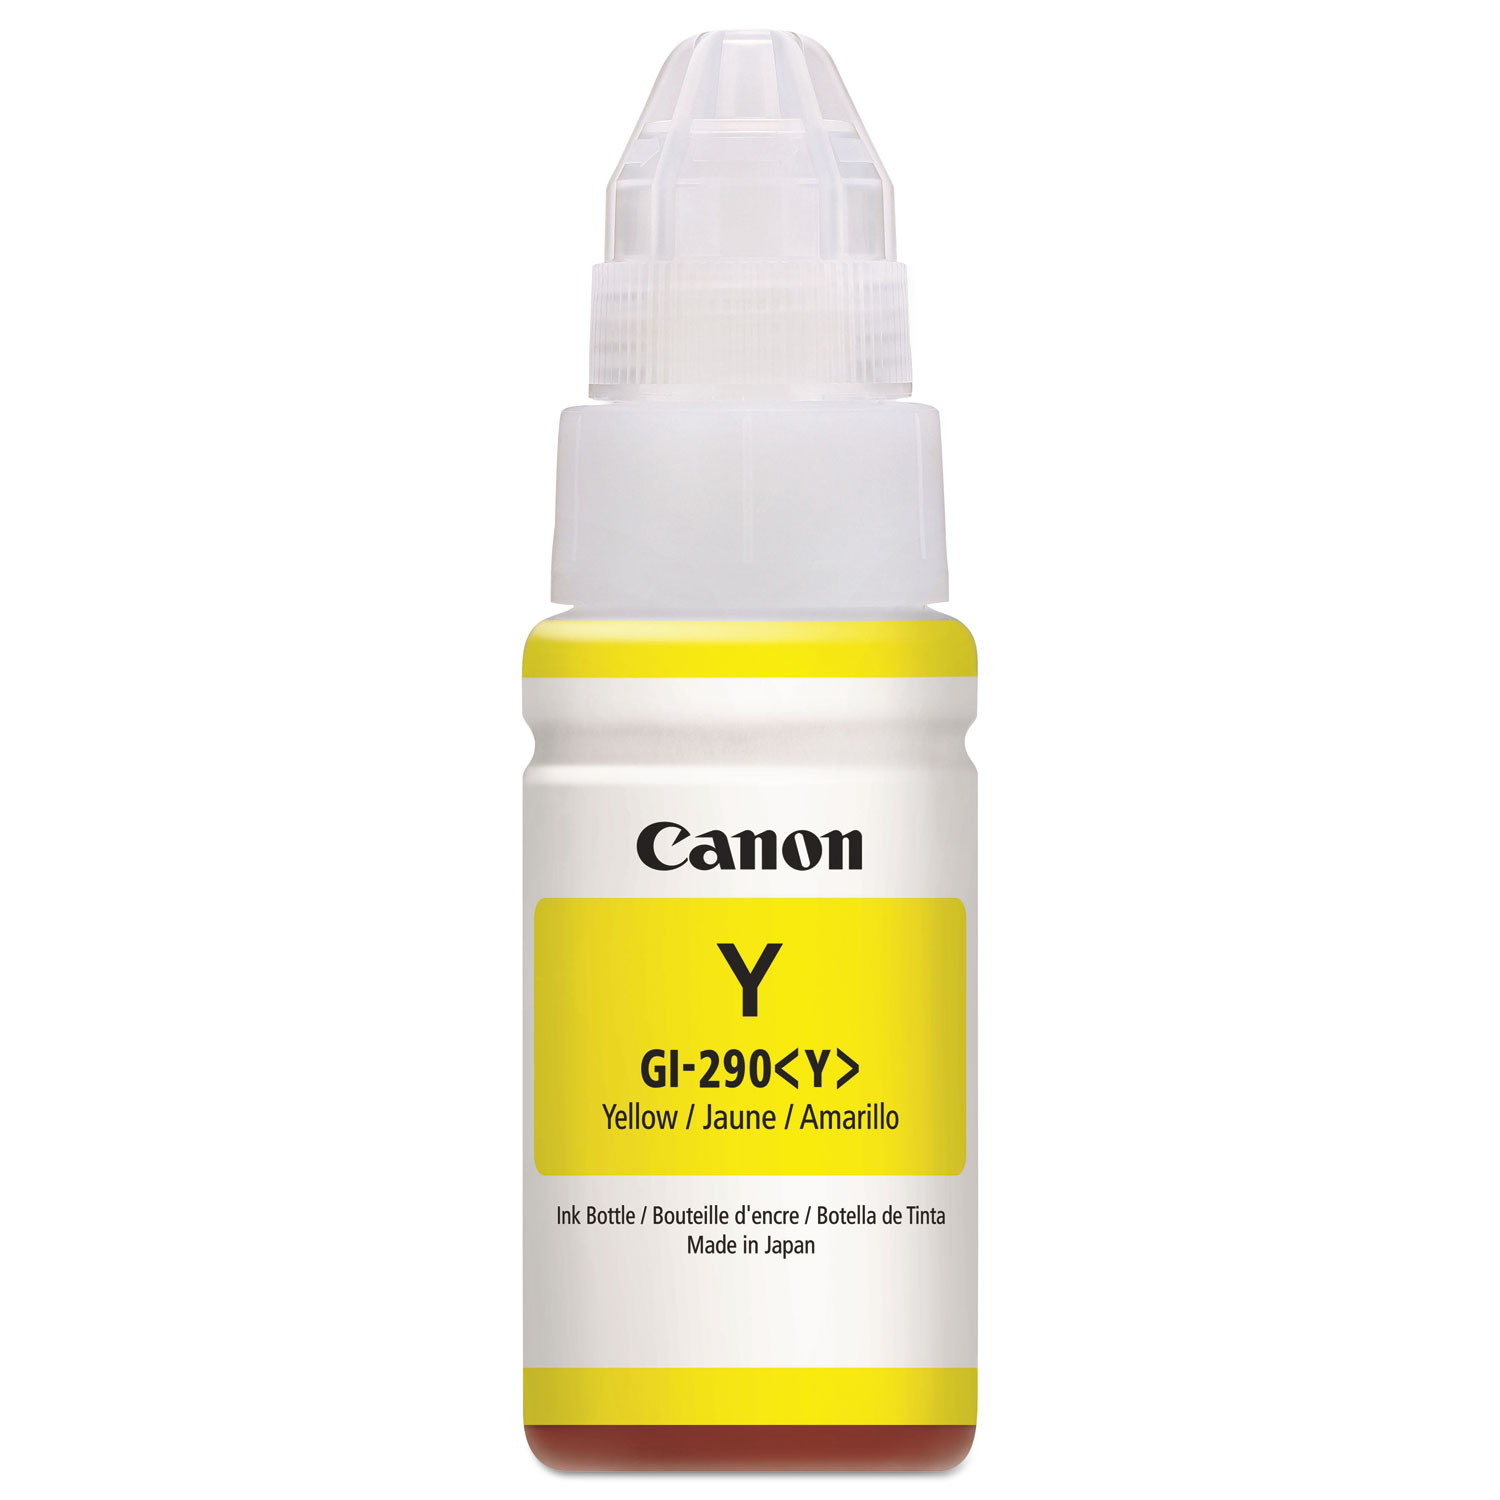  Canon 1598C001 1598C001 (GI-290) High-Yield Ink Bottle, 7000 Page-Yield, Yellow (CNM1598C001) 